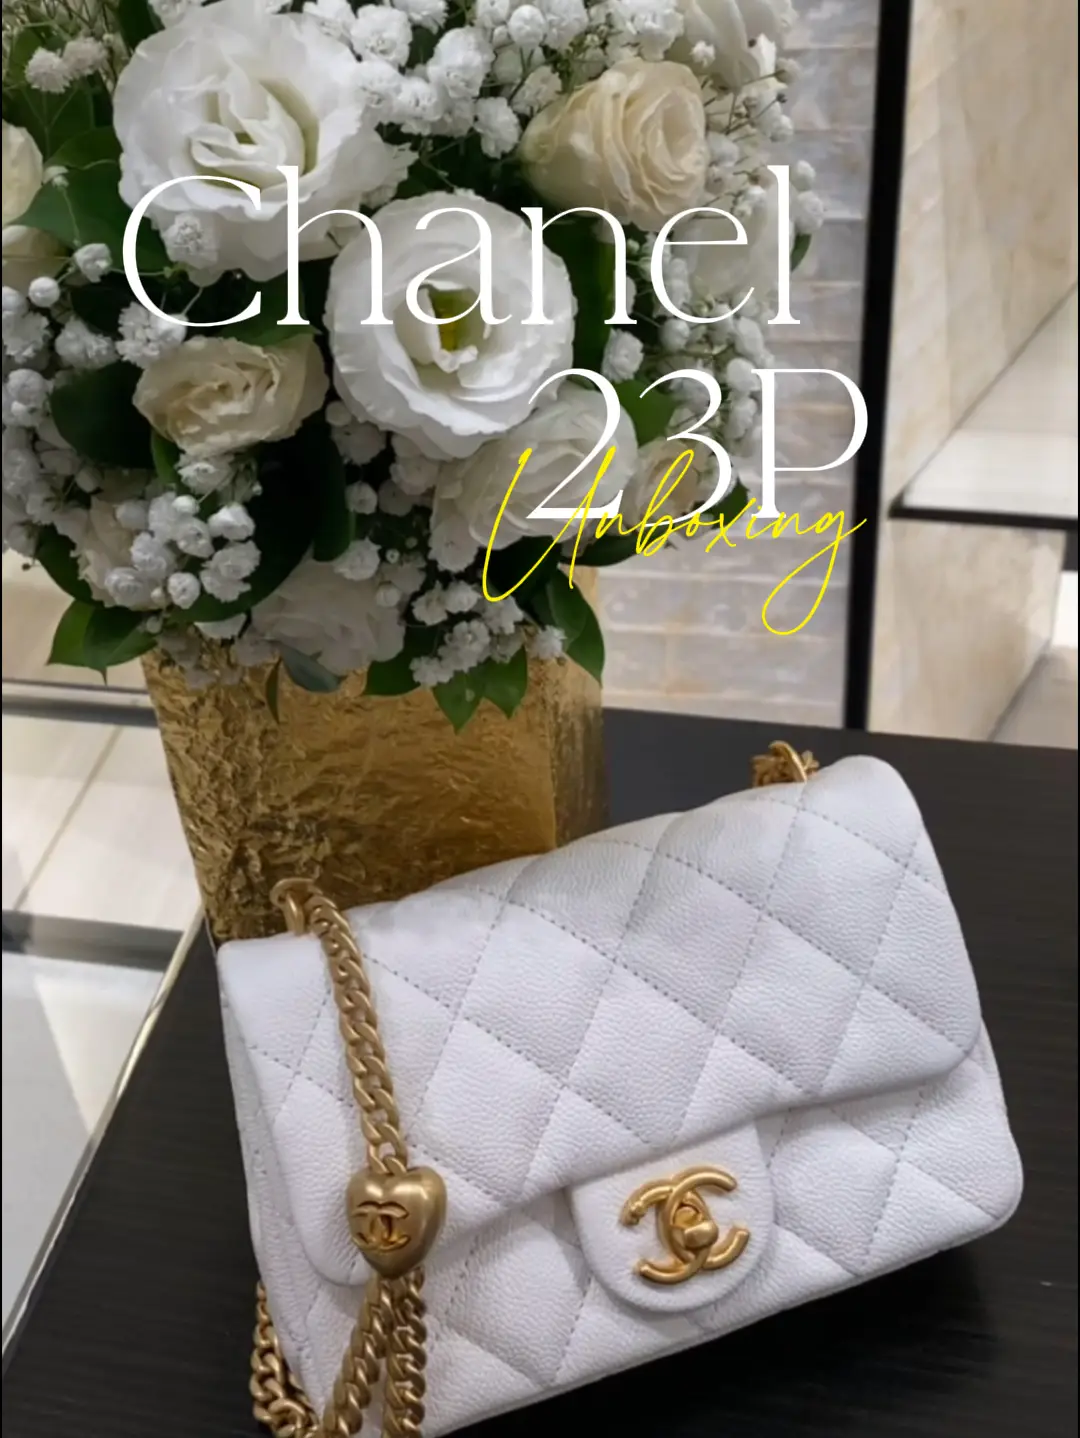 Chanel 23P Bag Unboxing? | Article posted by etherealpeonies | Lemon8